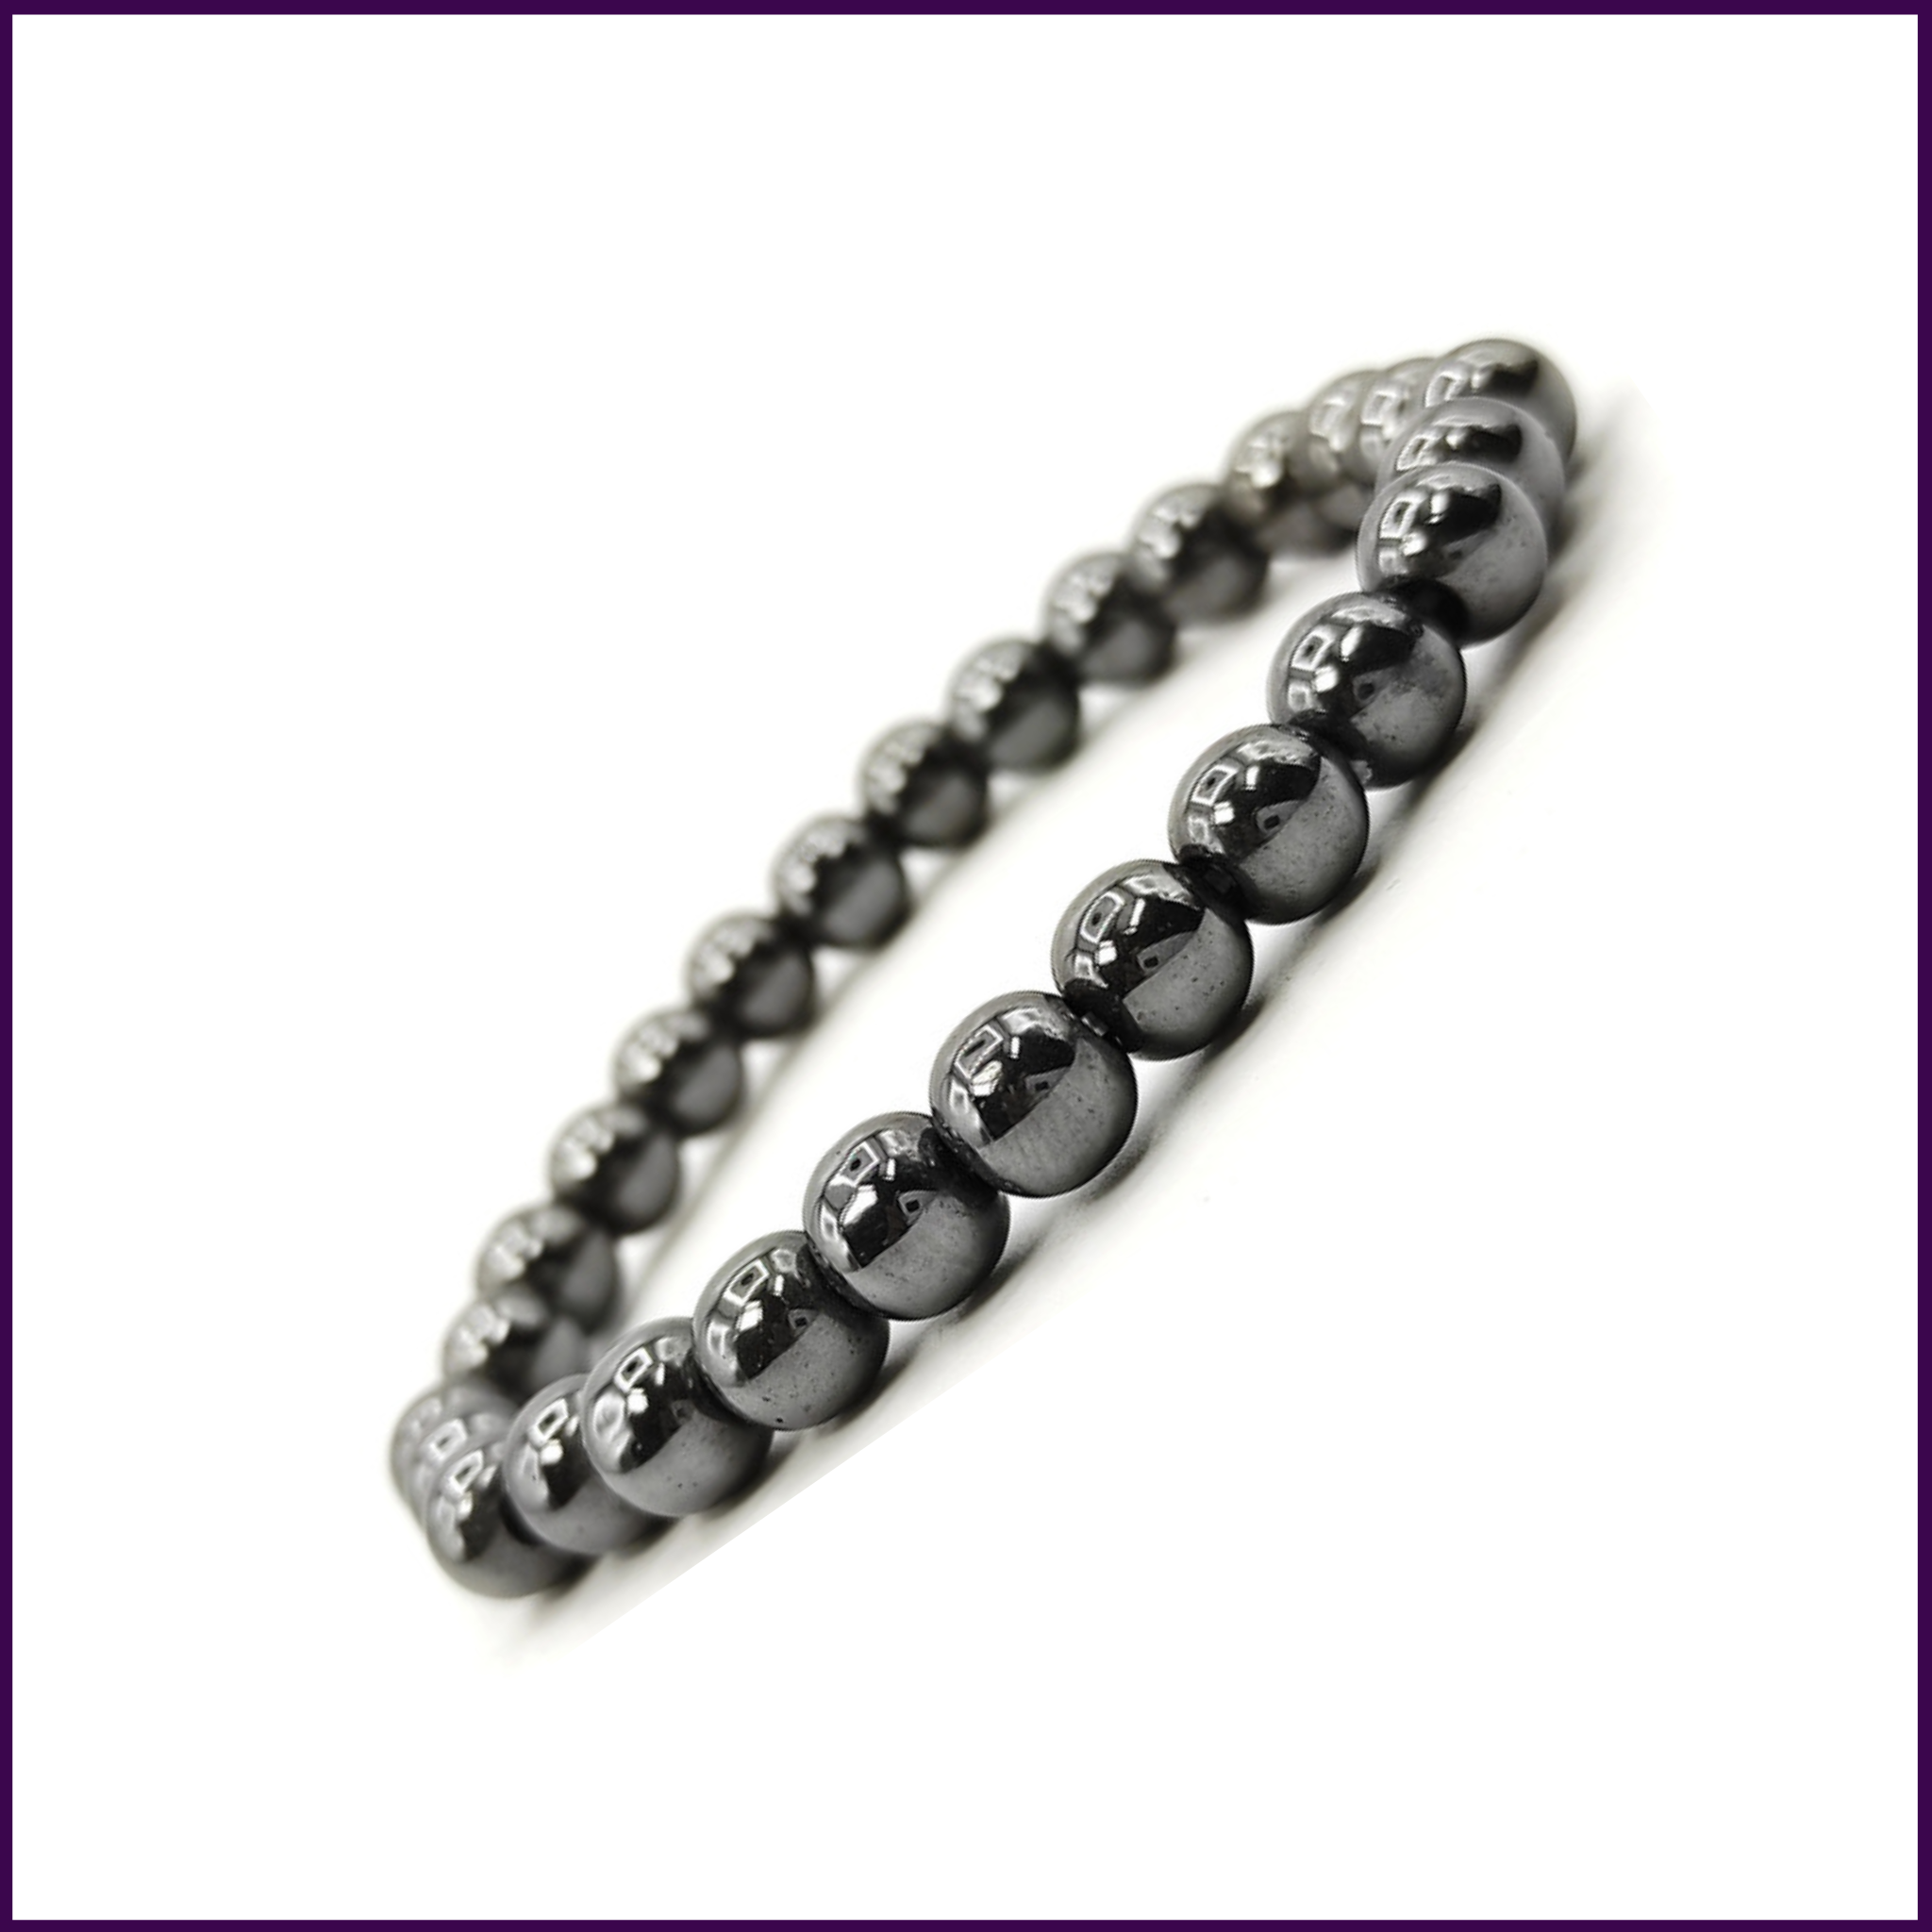 Hematite Bracelet Crystal Stimulates Confidence, Concentration and Focus for students - 51pyramids